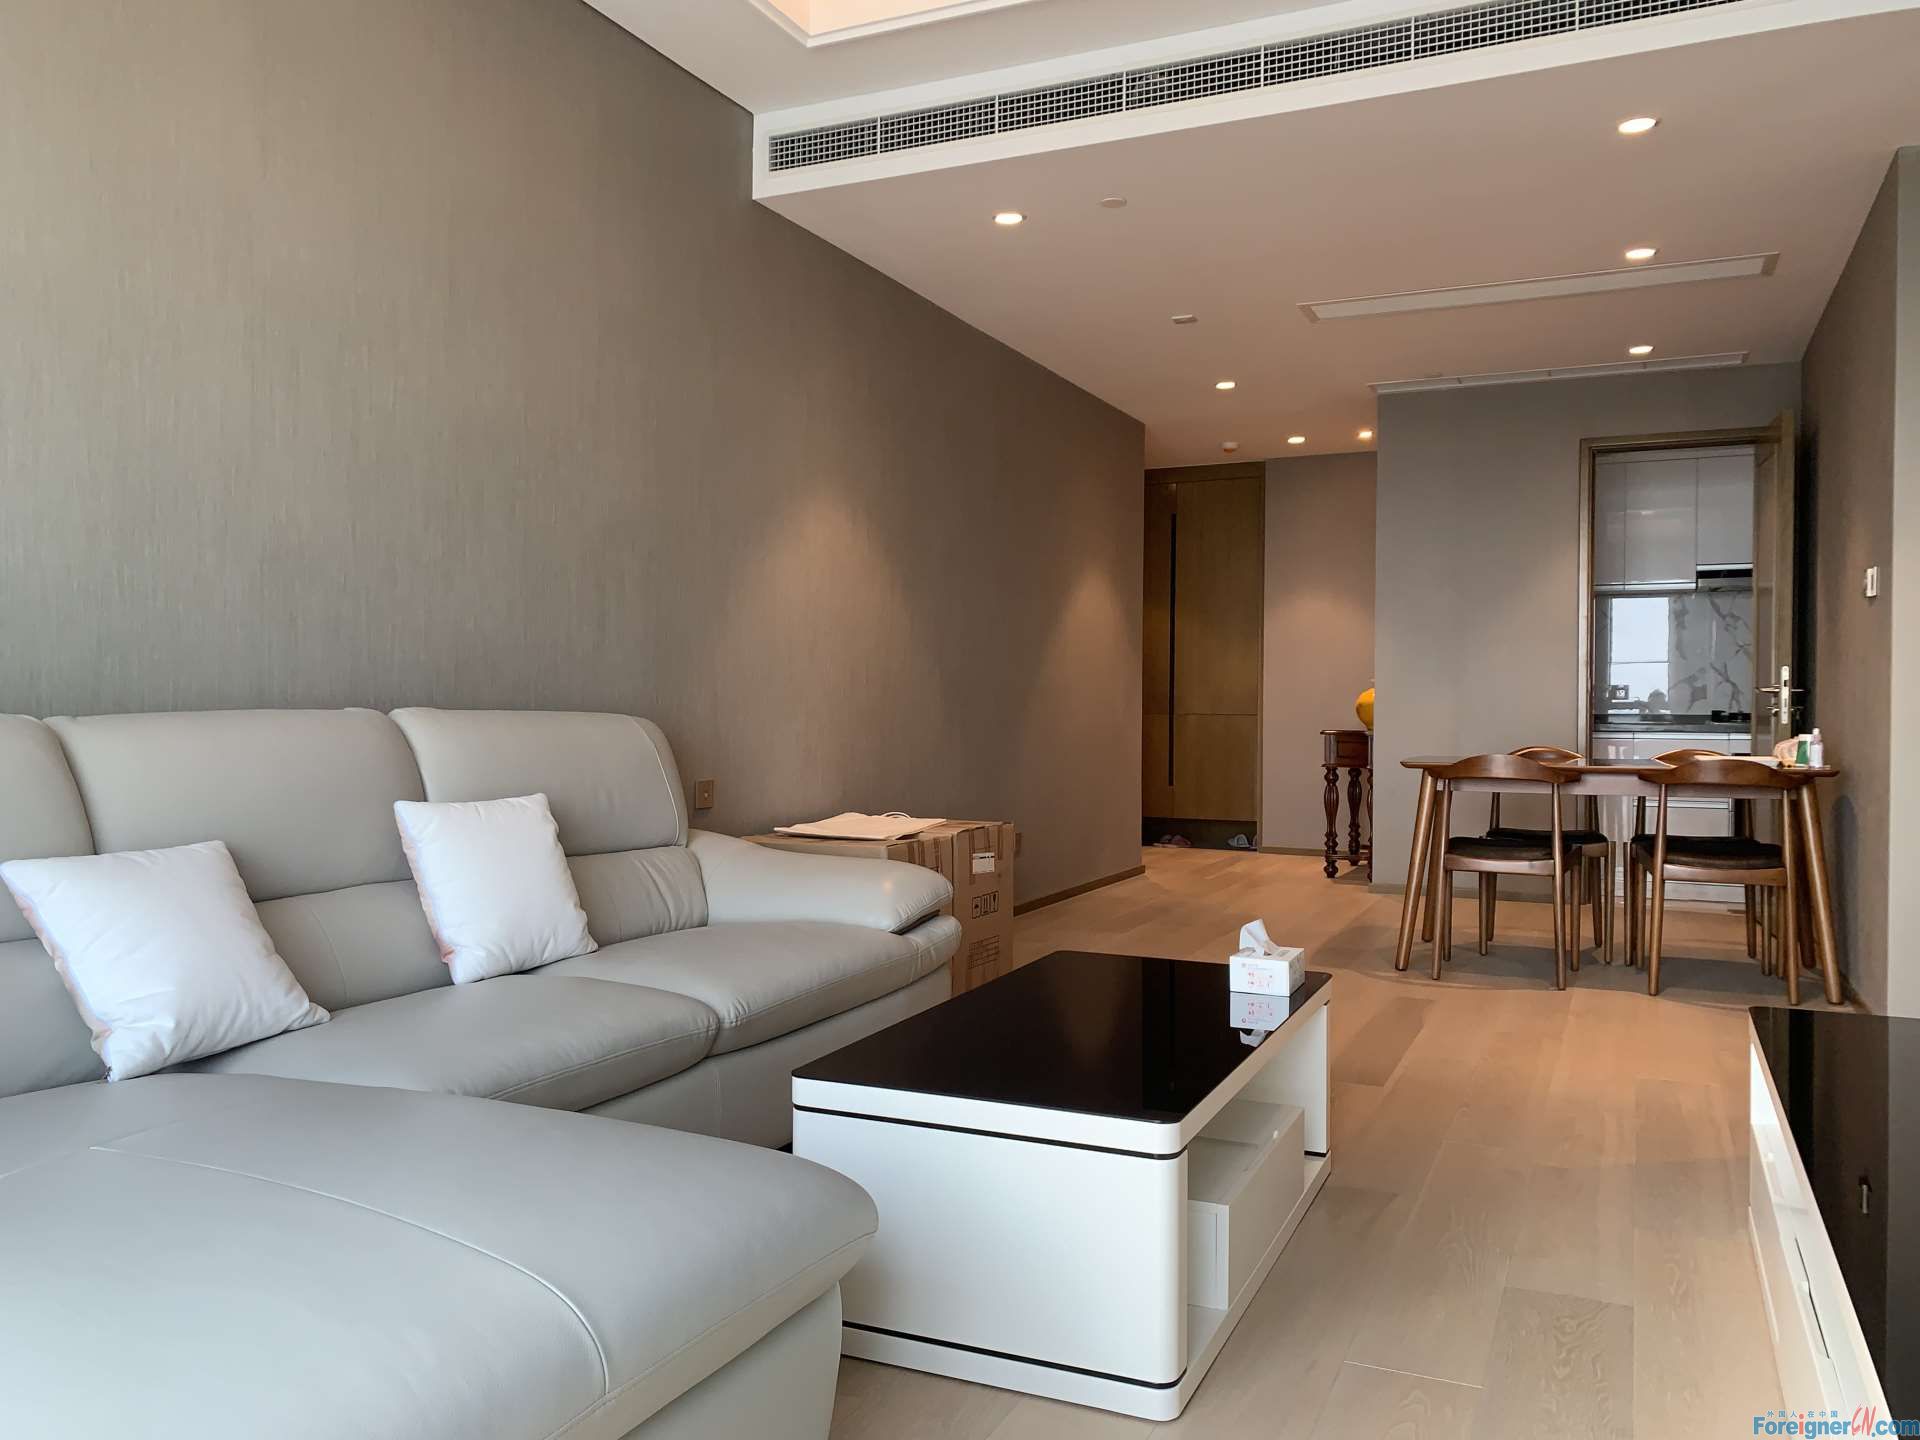 Fantastic!! ! Apartment rent for expats /Times square /2 bedrooms and 1 bathroom/modern design/central AC/Jinji lake 